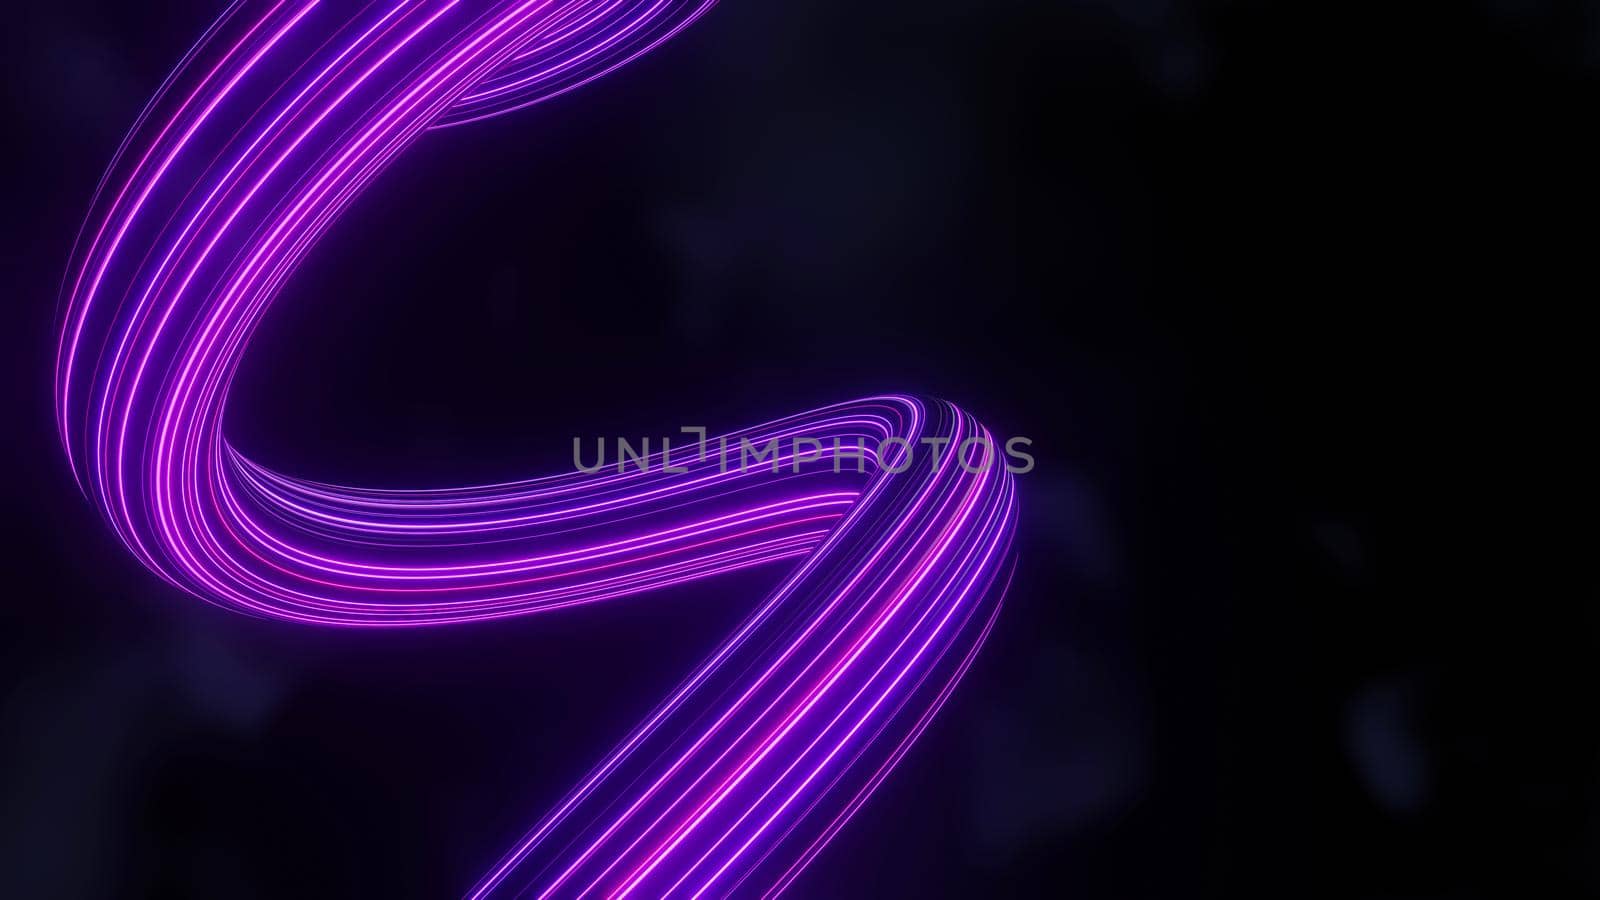 3d render of flash neon and light glowing on dark scene. Speed light tunnel through the city or urban. Technology internet of future network. Sci fiction of hyperspace interstellar travel. by tanatpon13p